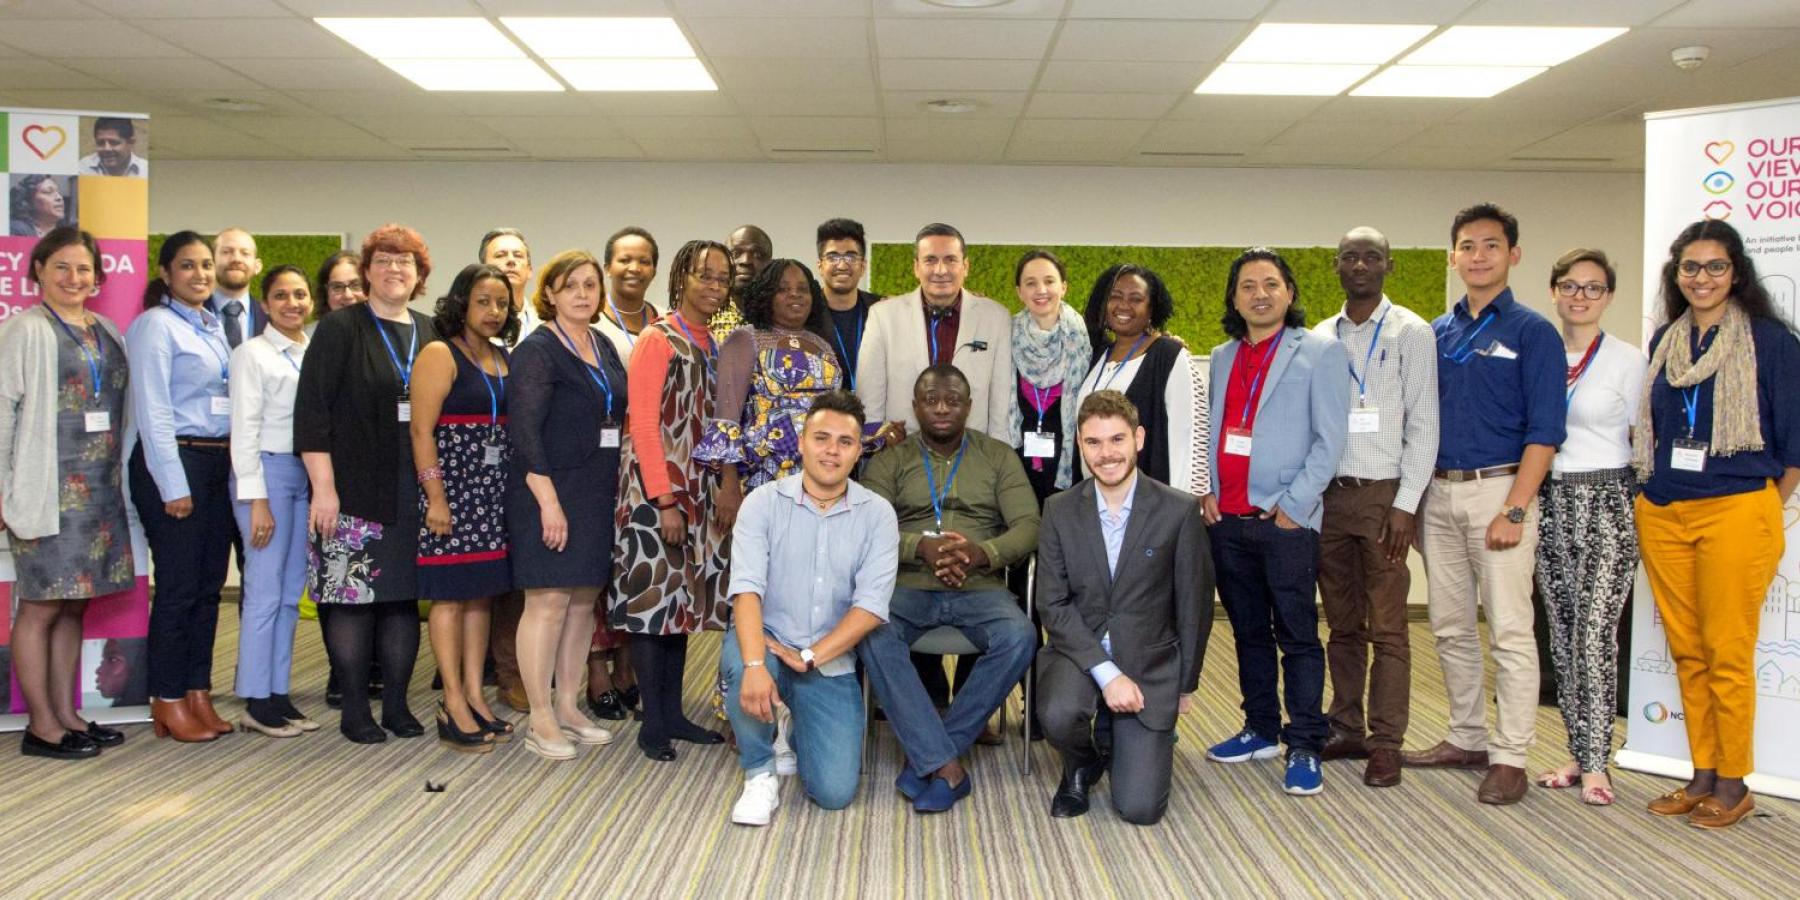 'Family photo' from the Our Views Our Voices training of people living with NCDs, ahead of the 71st World Health Assembly.